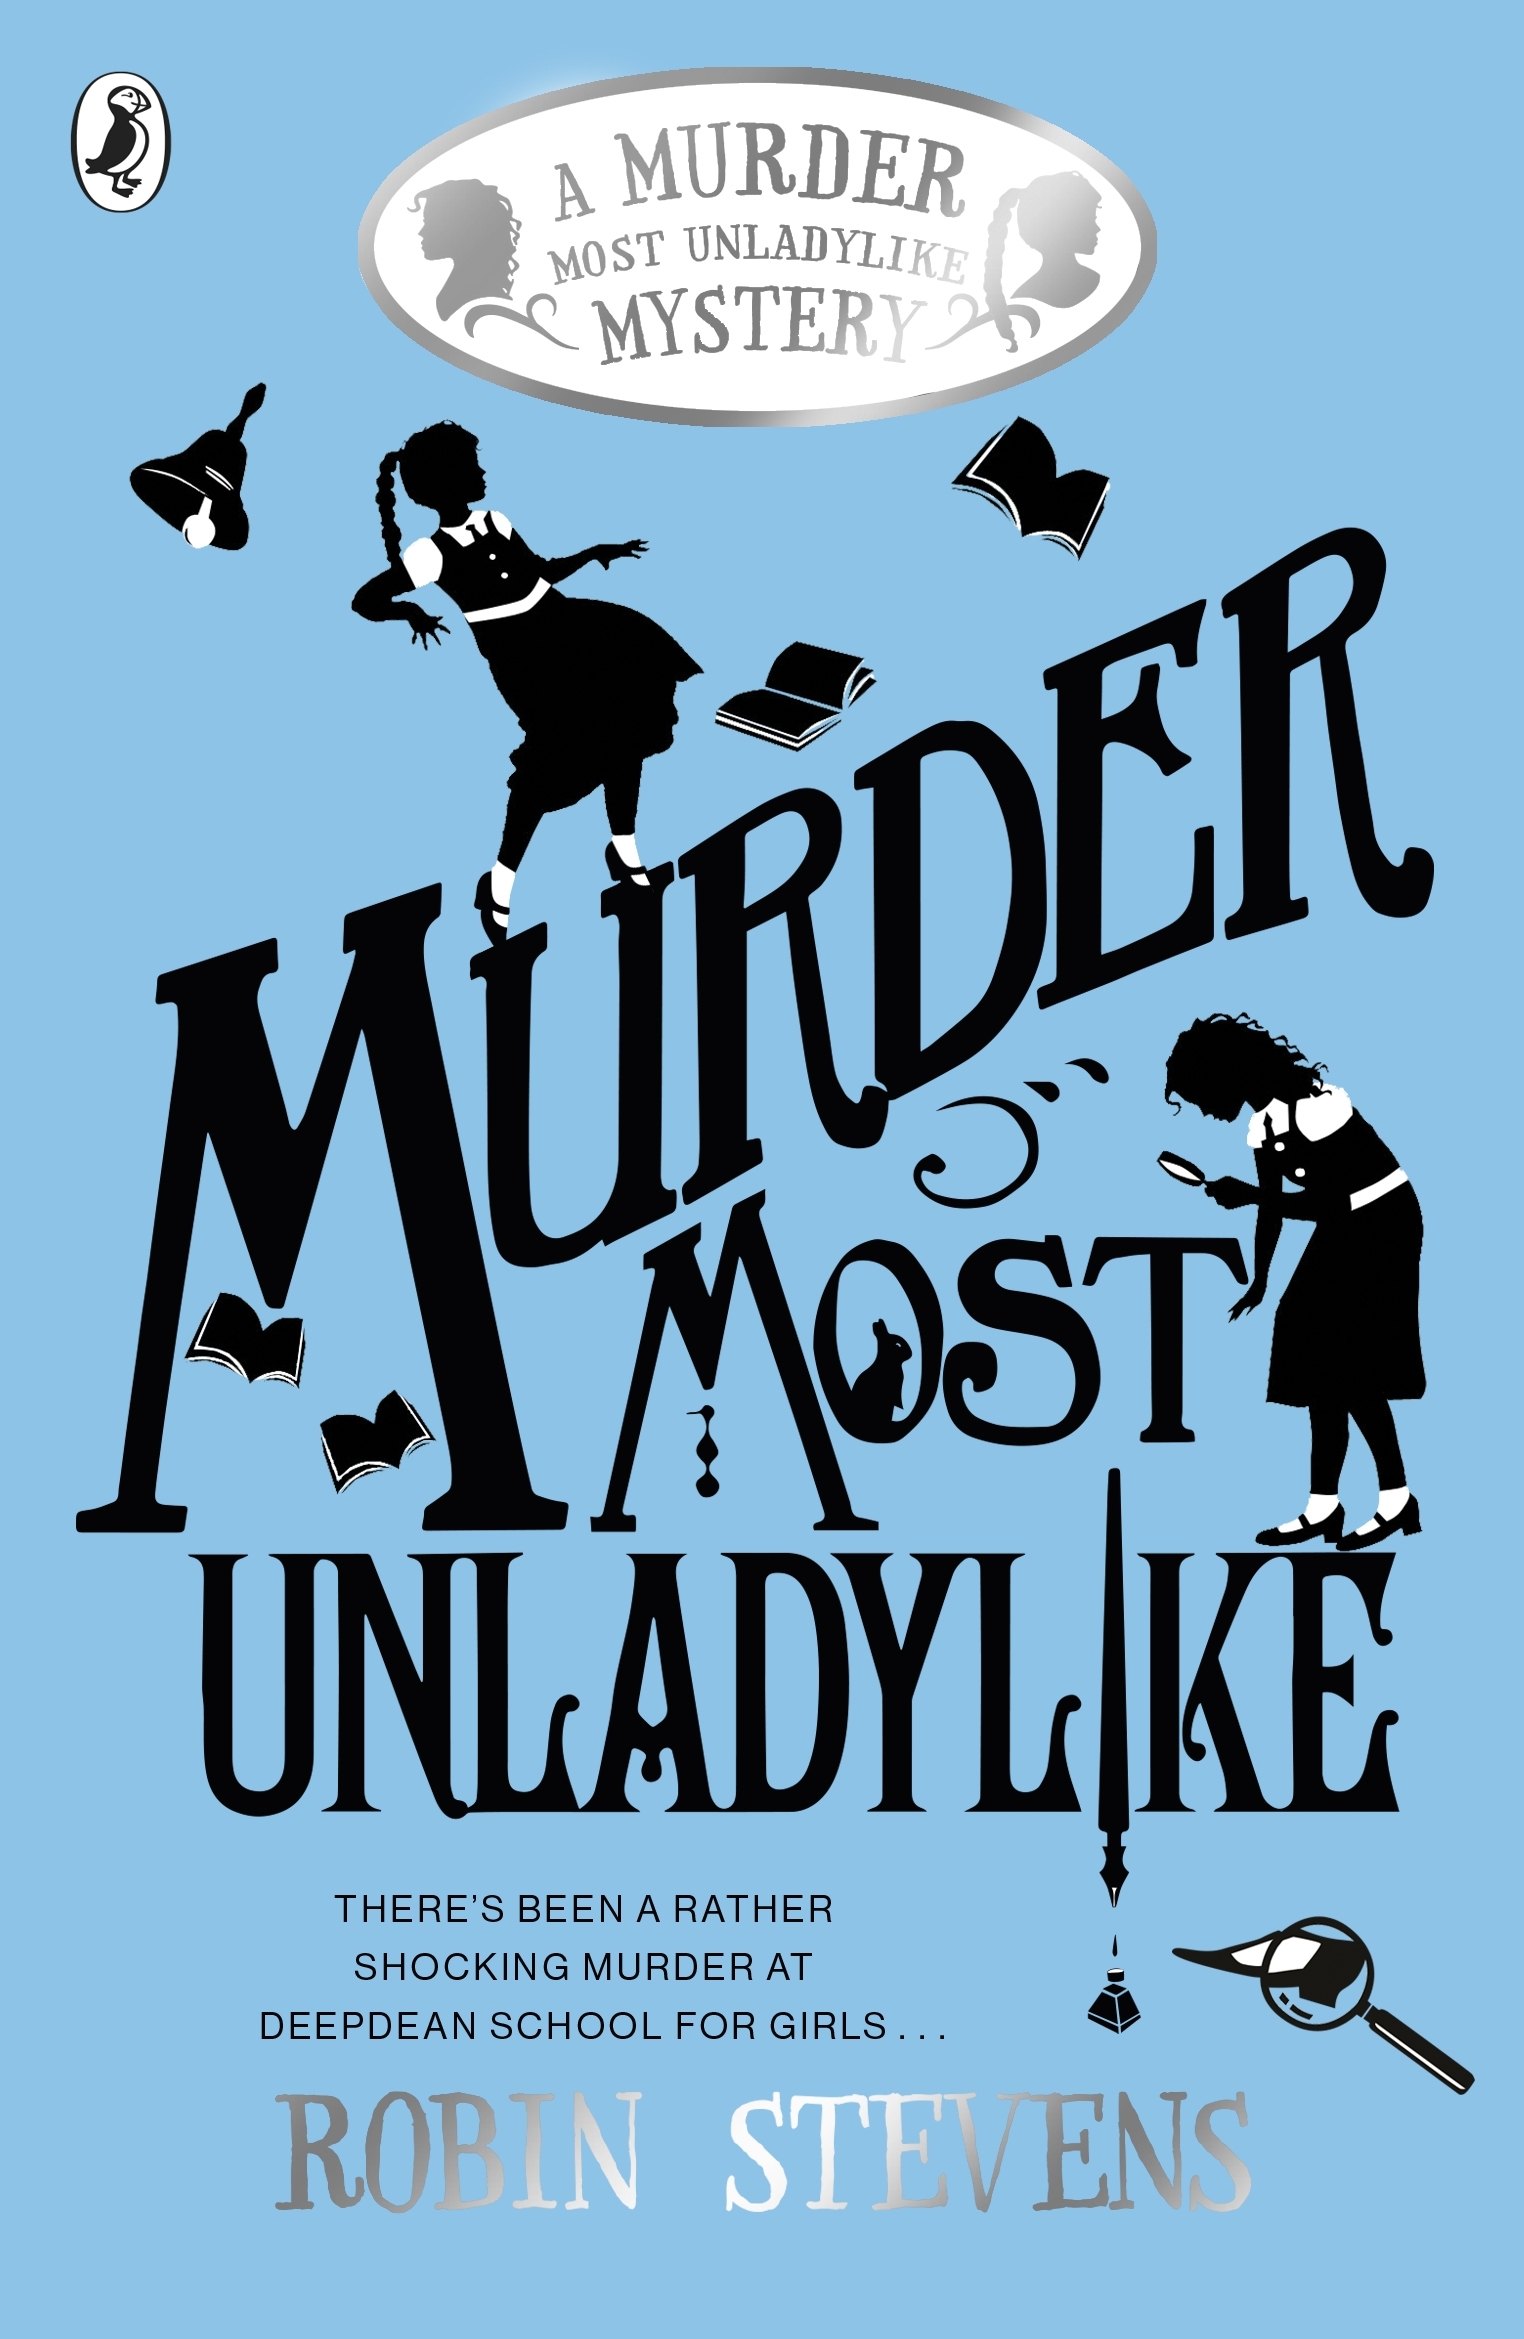 Cover for Murder Most Unladylike. Two silhouetted girls stand on the letters of the title. The background is baby blue. 